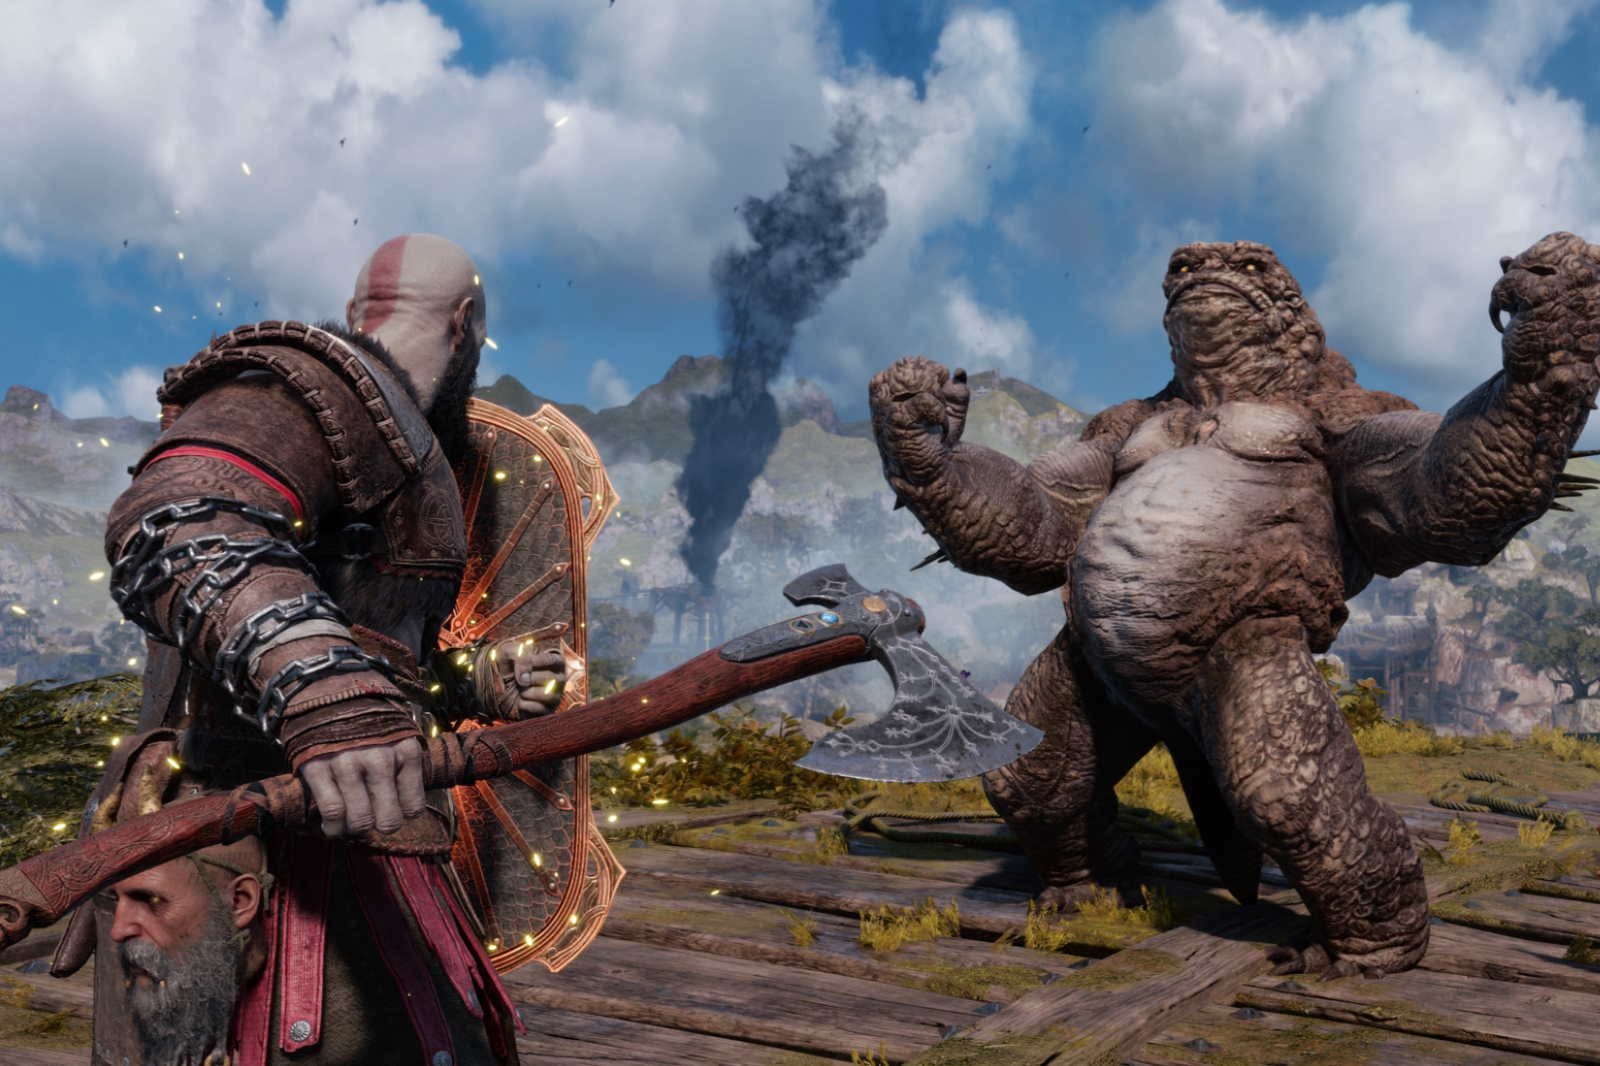 Users review bomb GoW Ragnarok by bashing its cinematics